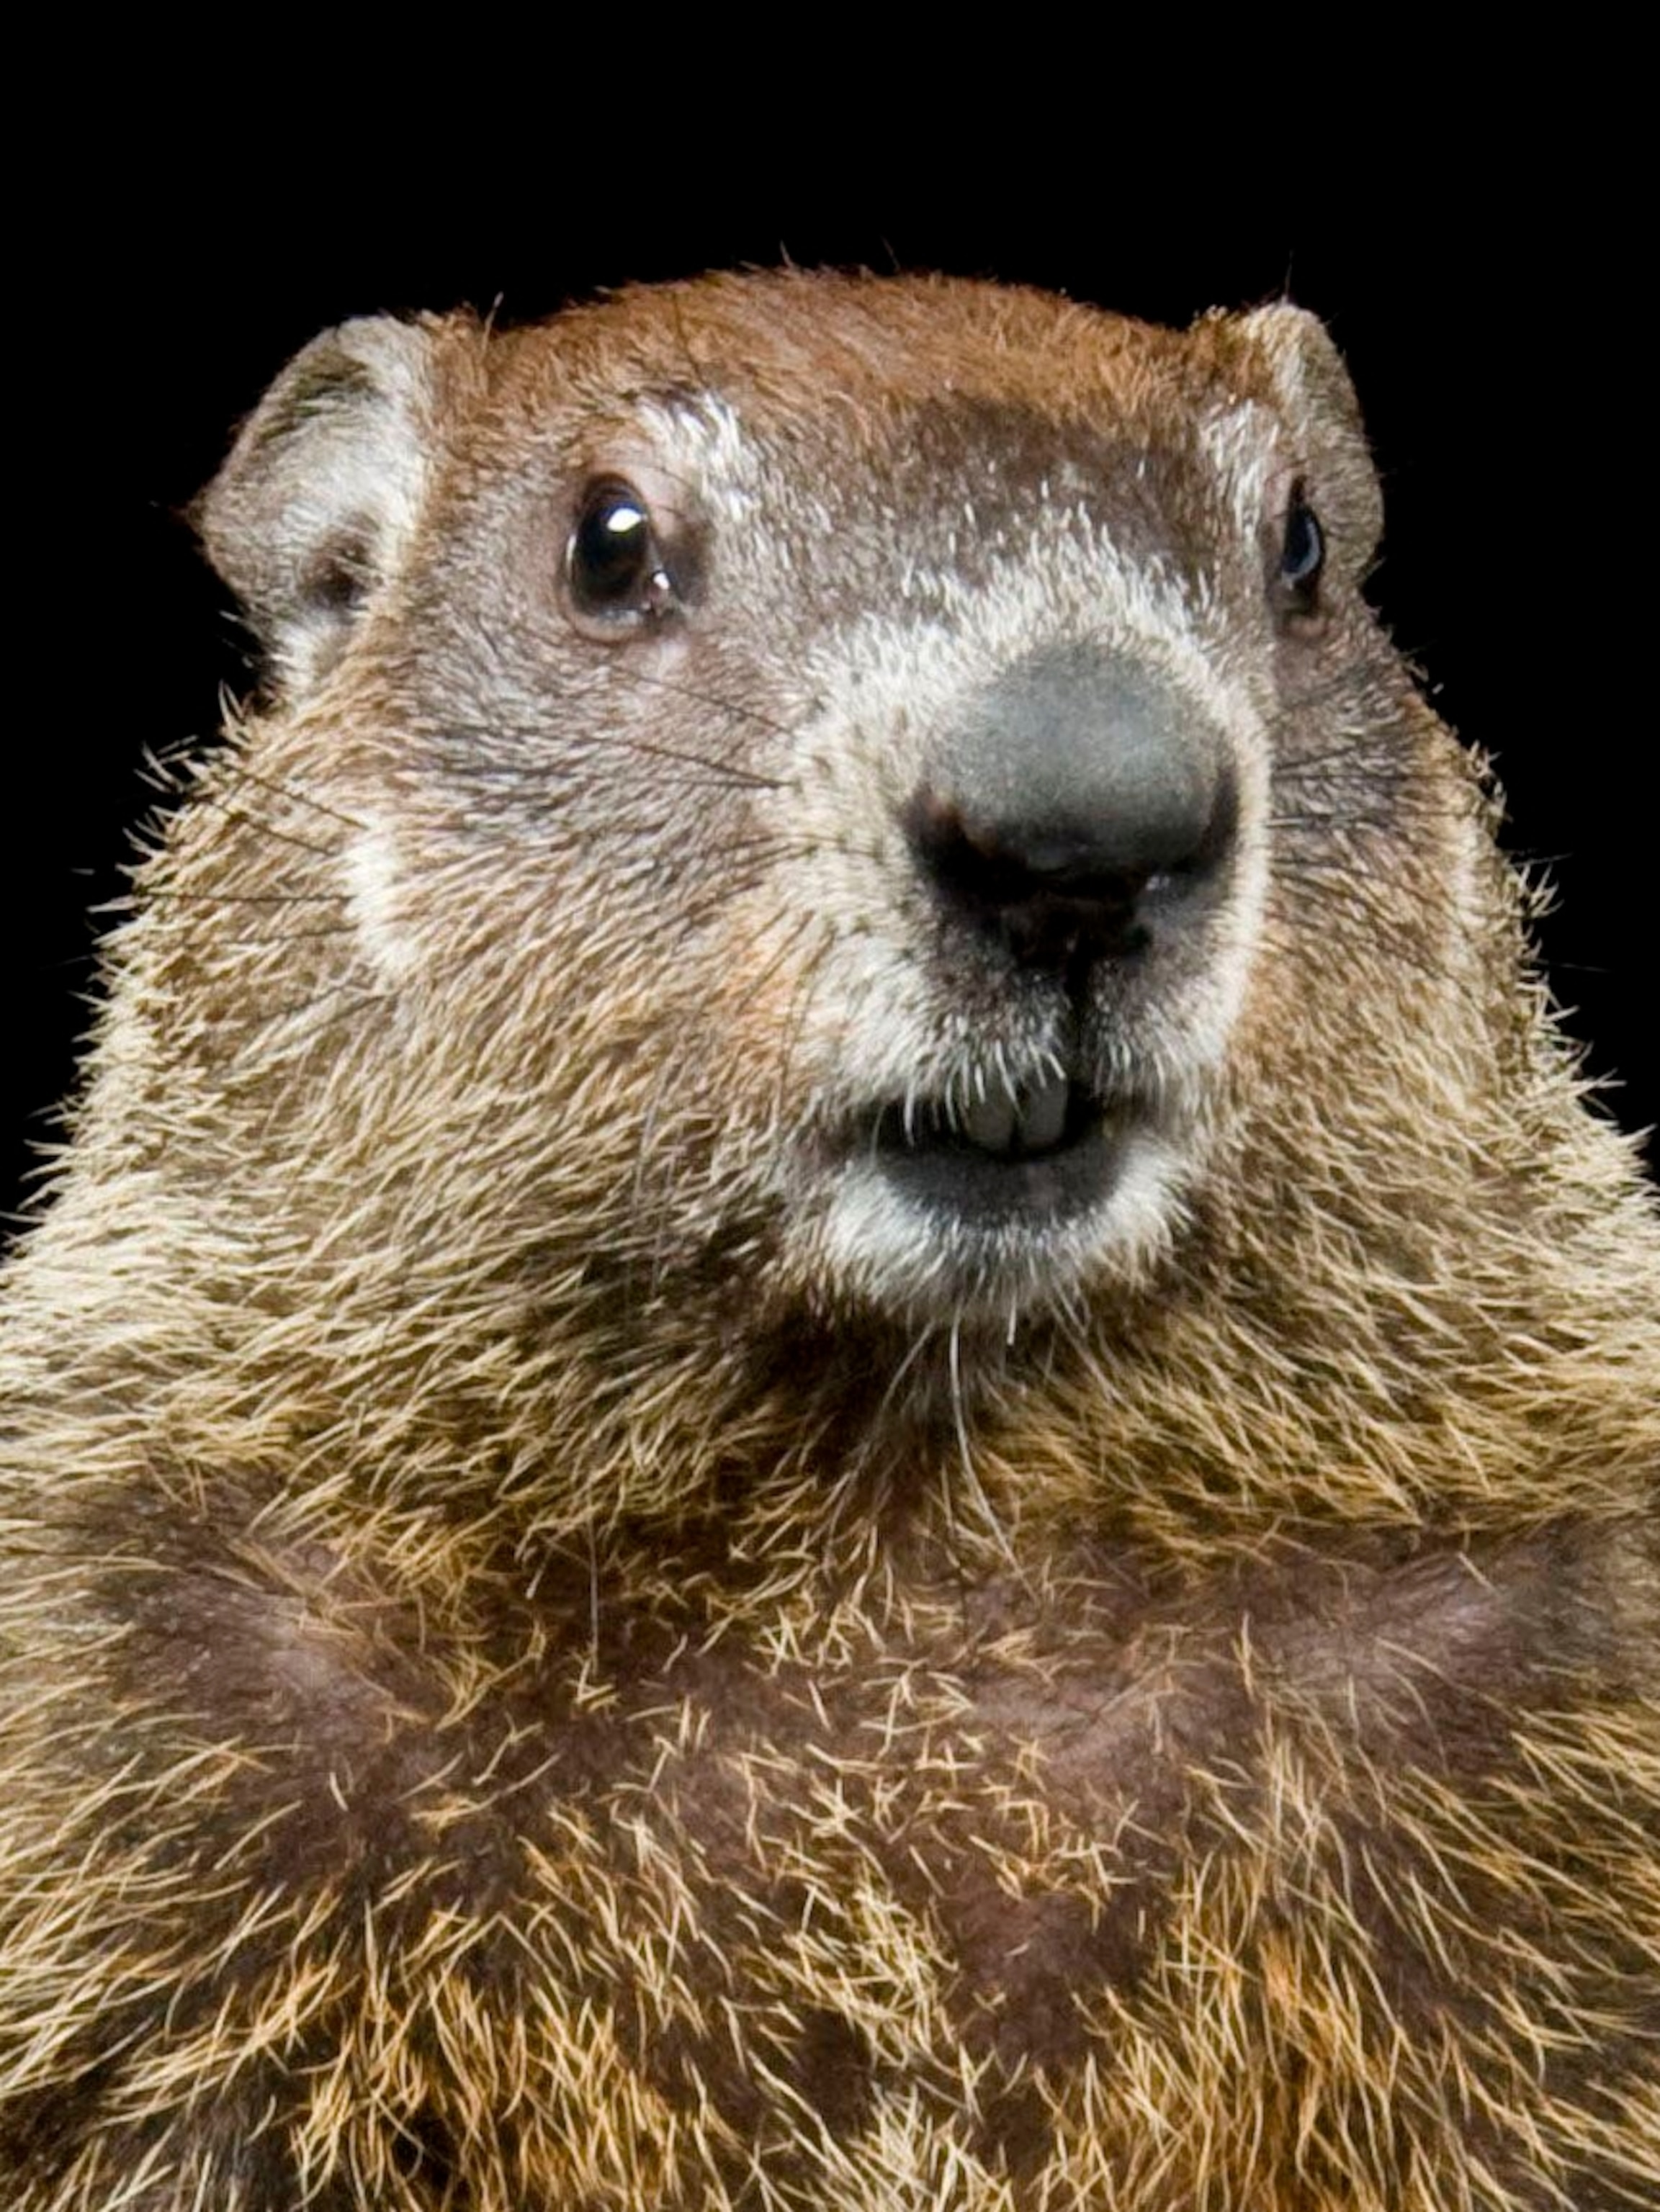 Groundhog, facts and photo